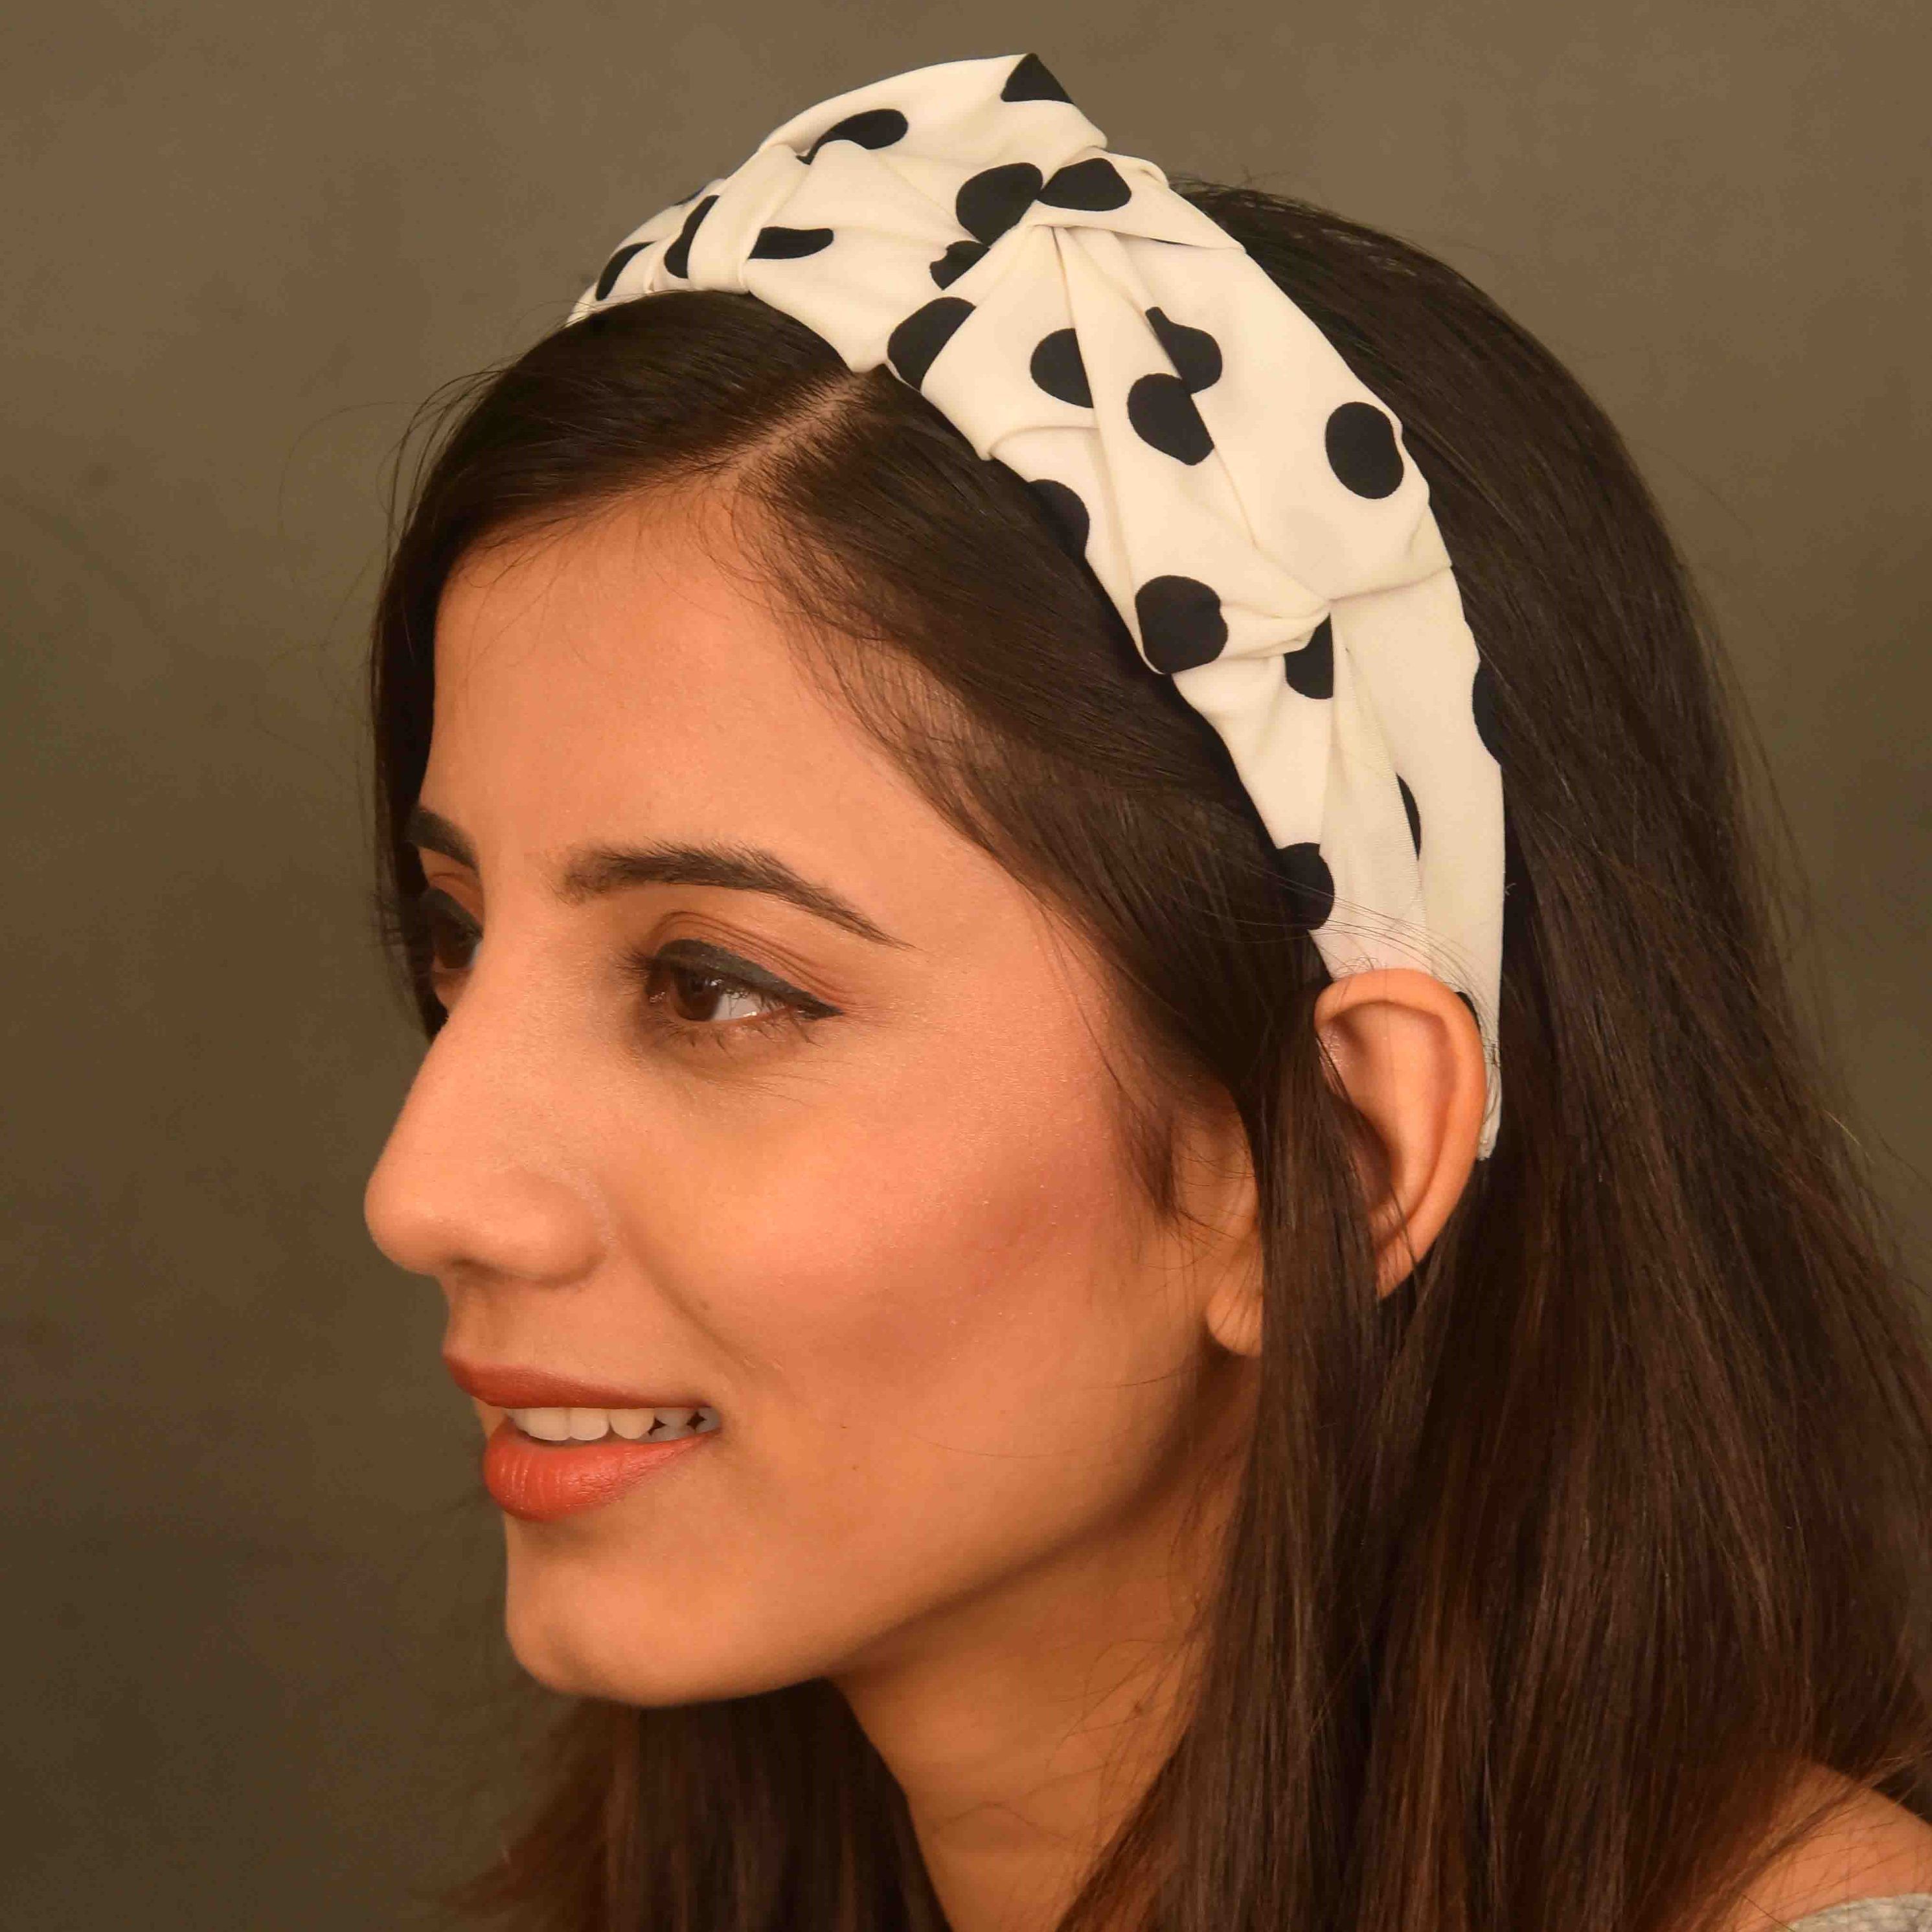 YoungWildFree Hair Bands White Dotted Fancy Hairbands For Women  -Comfortable Cotton Fabric: Buy YoungWildFree Hair Bands White Dotted Fancy  Hairbands For Women -Comfortable Cotton Fabric Online at Best Price in  India |